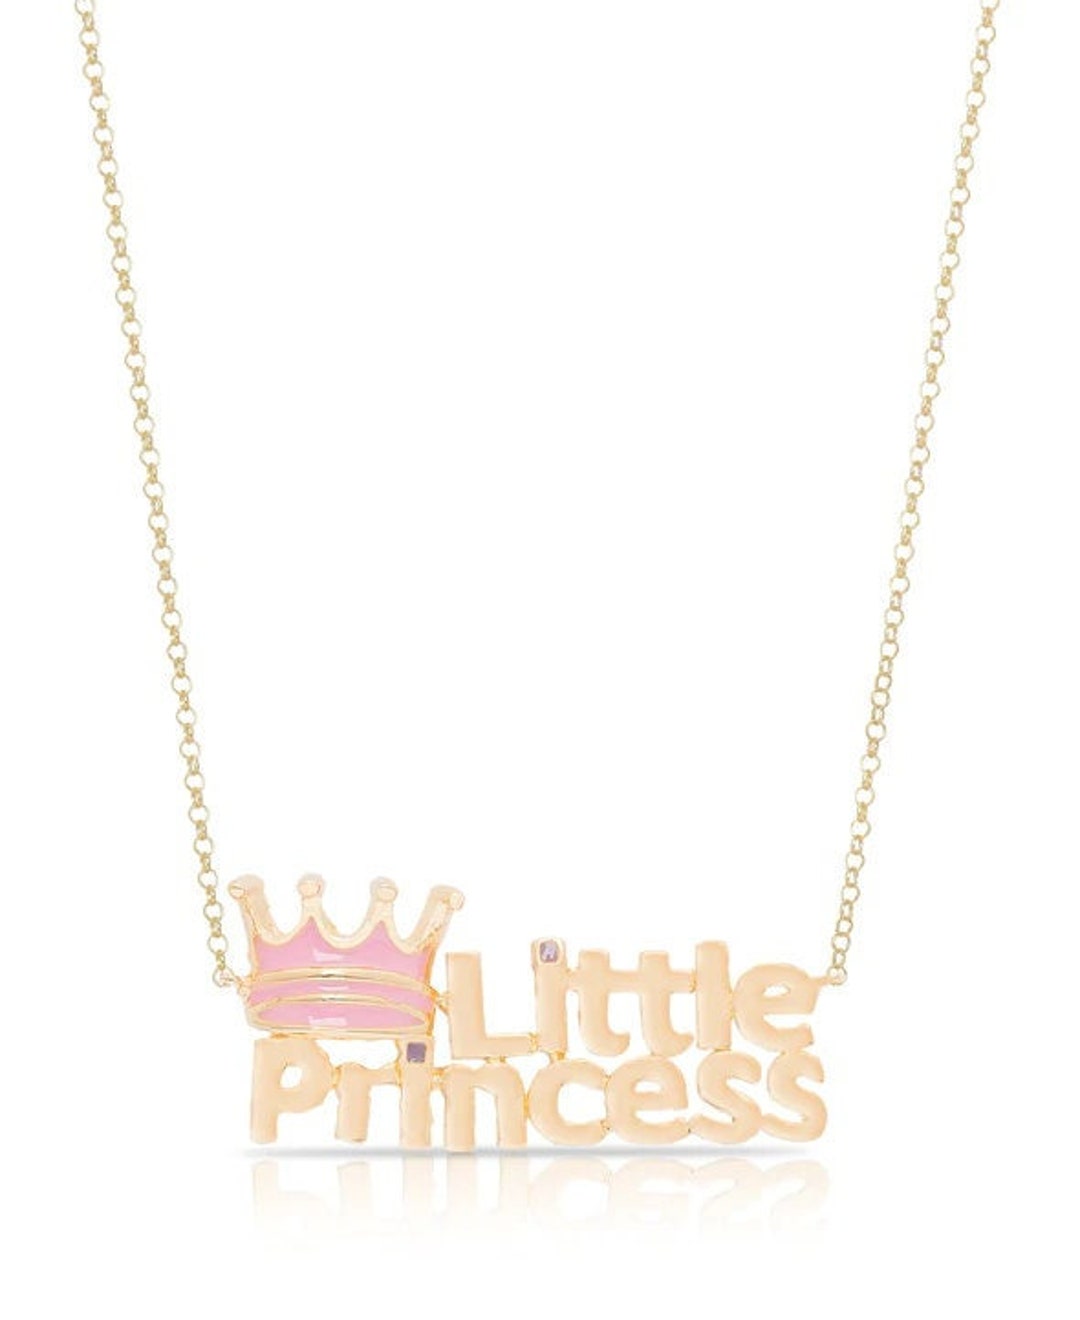 Mommy's Little Princess Necklace or Key Chain With Rhinestone Crown Charm  Little Girl, Daughter, Tiara - Etsy